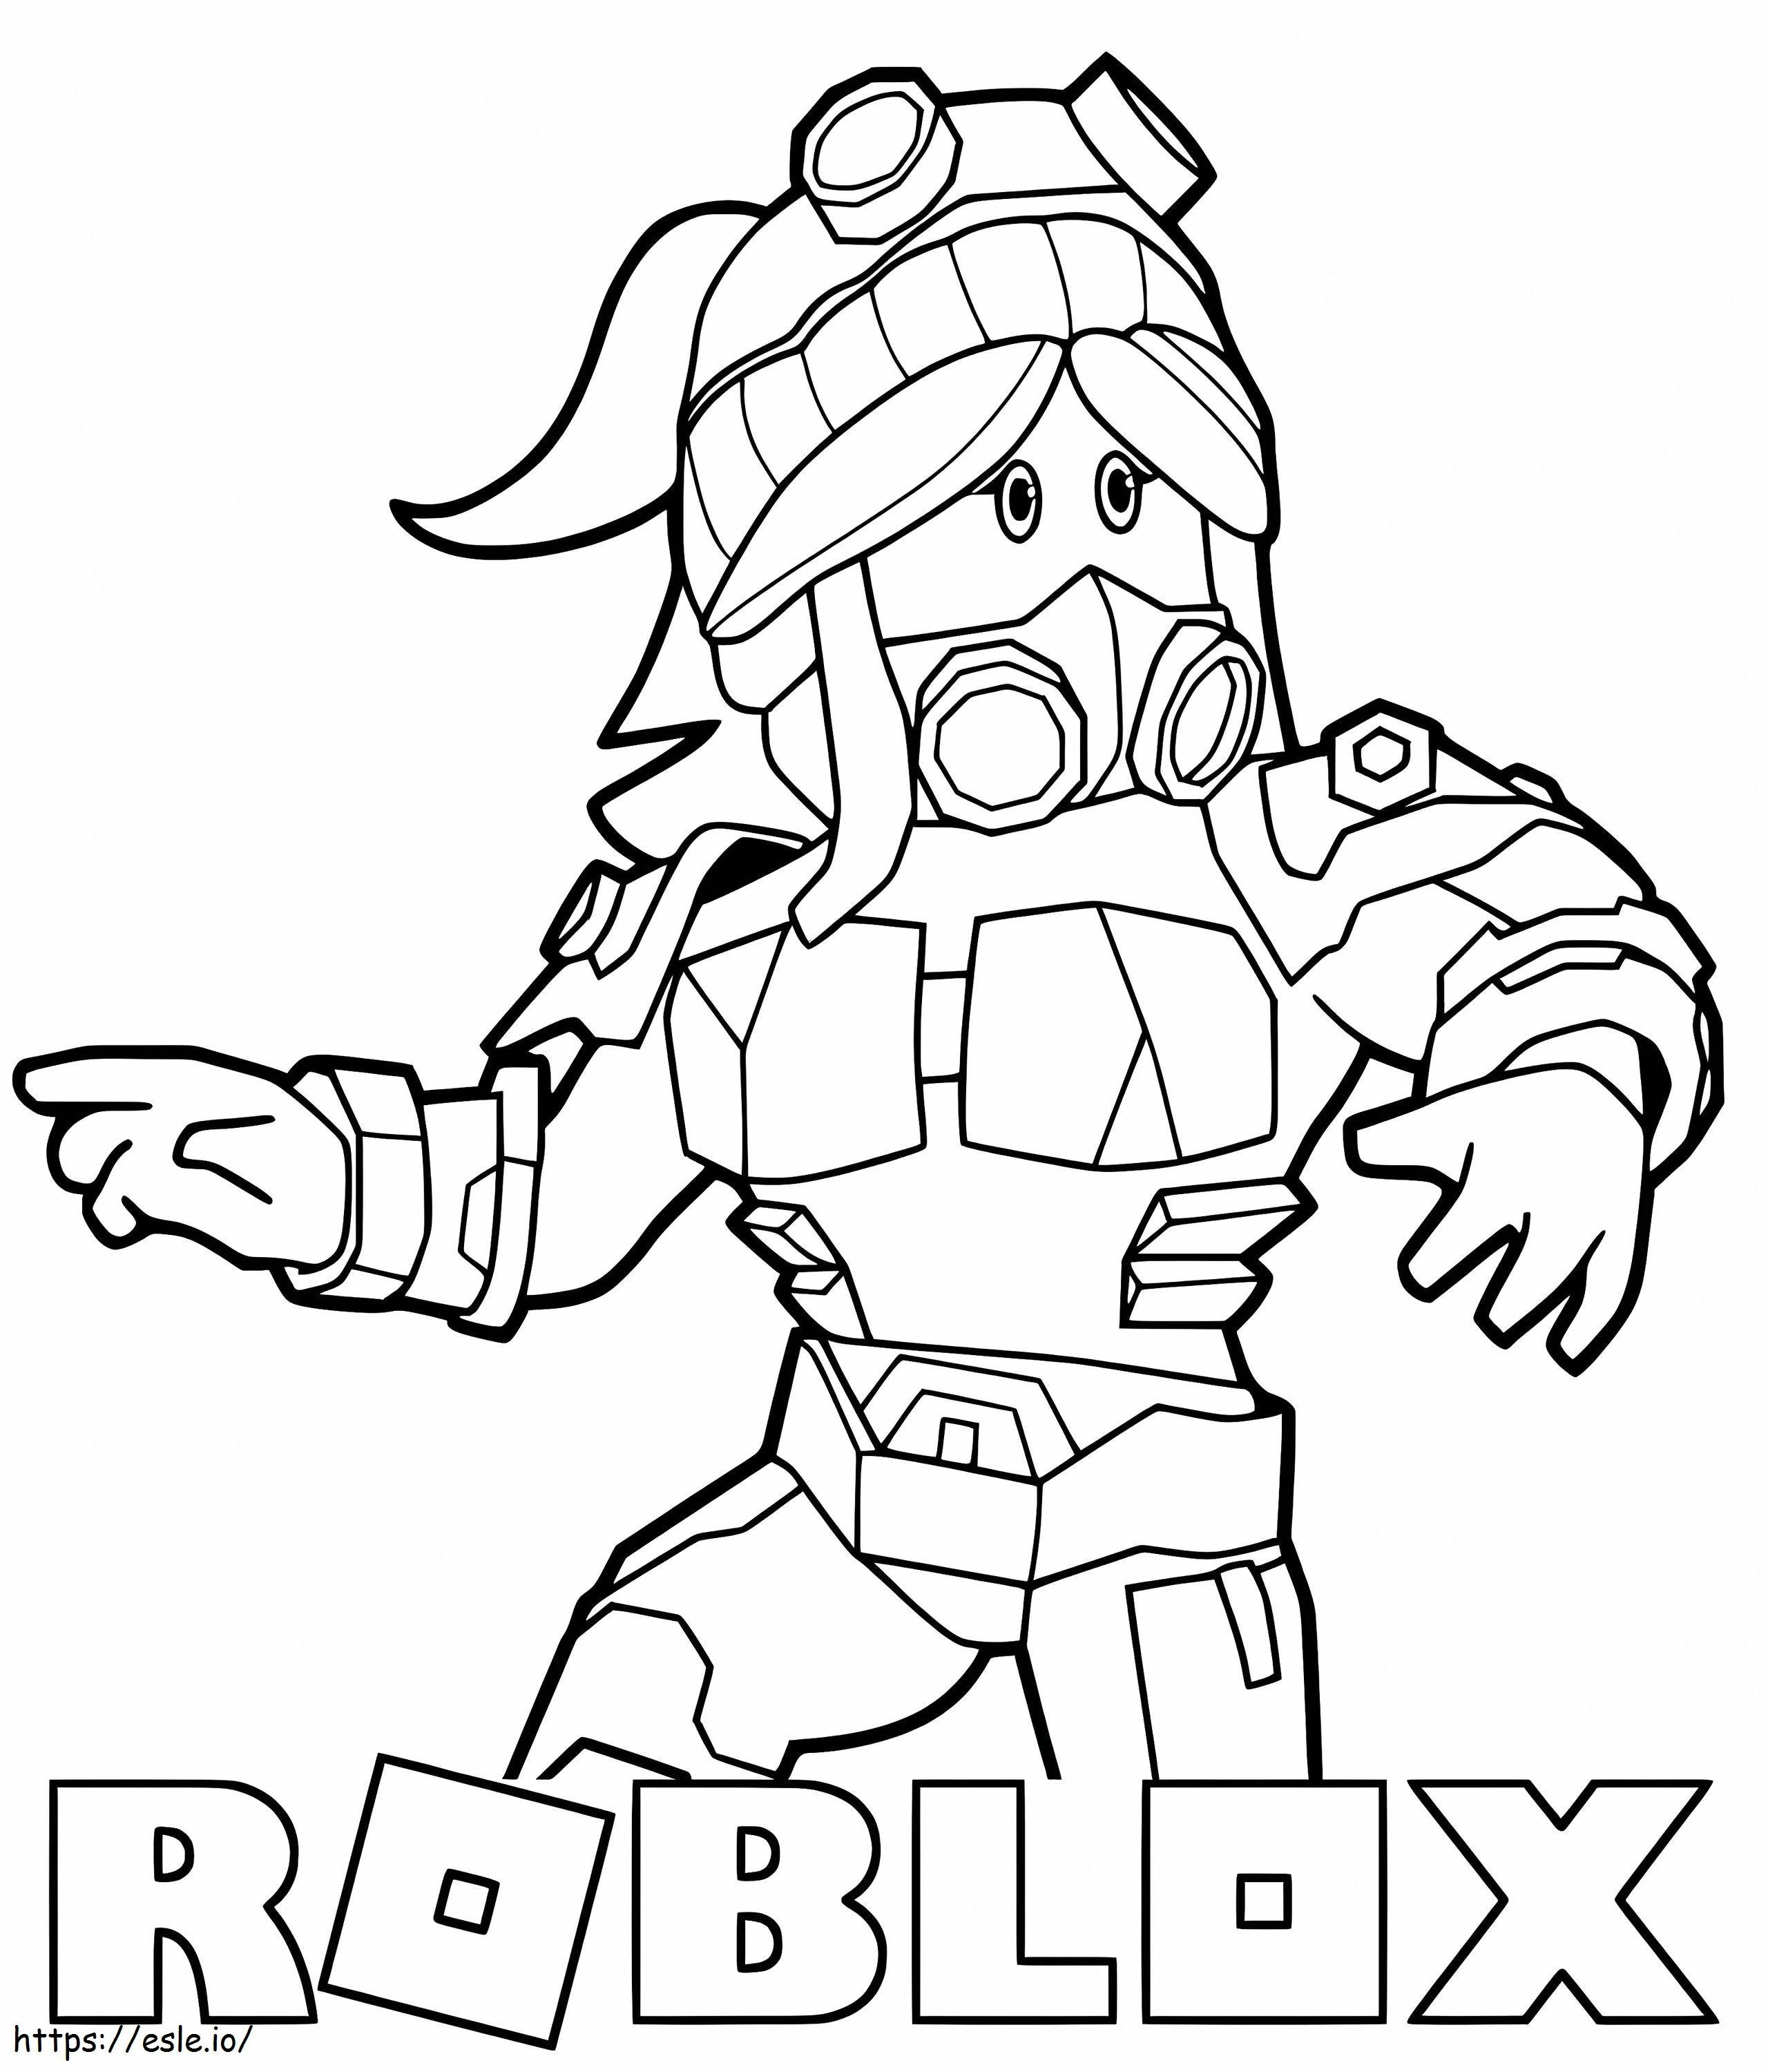 Roblox 4 coloring page